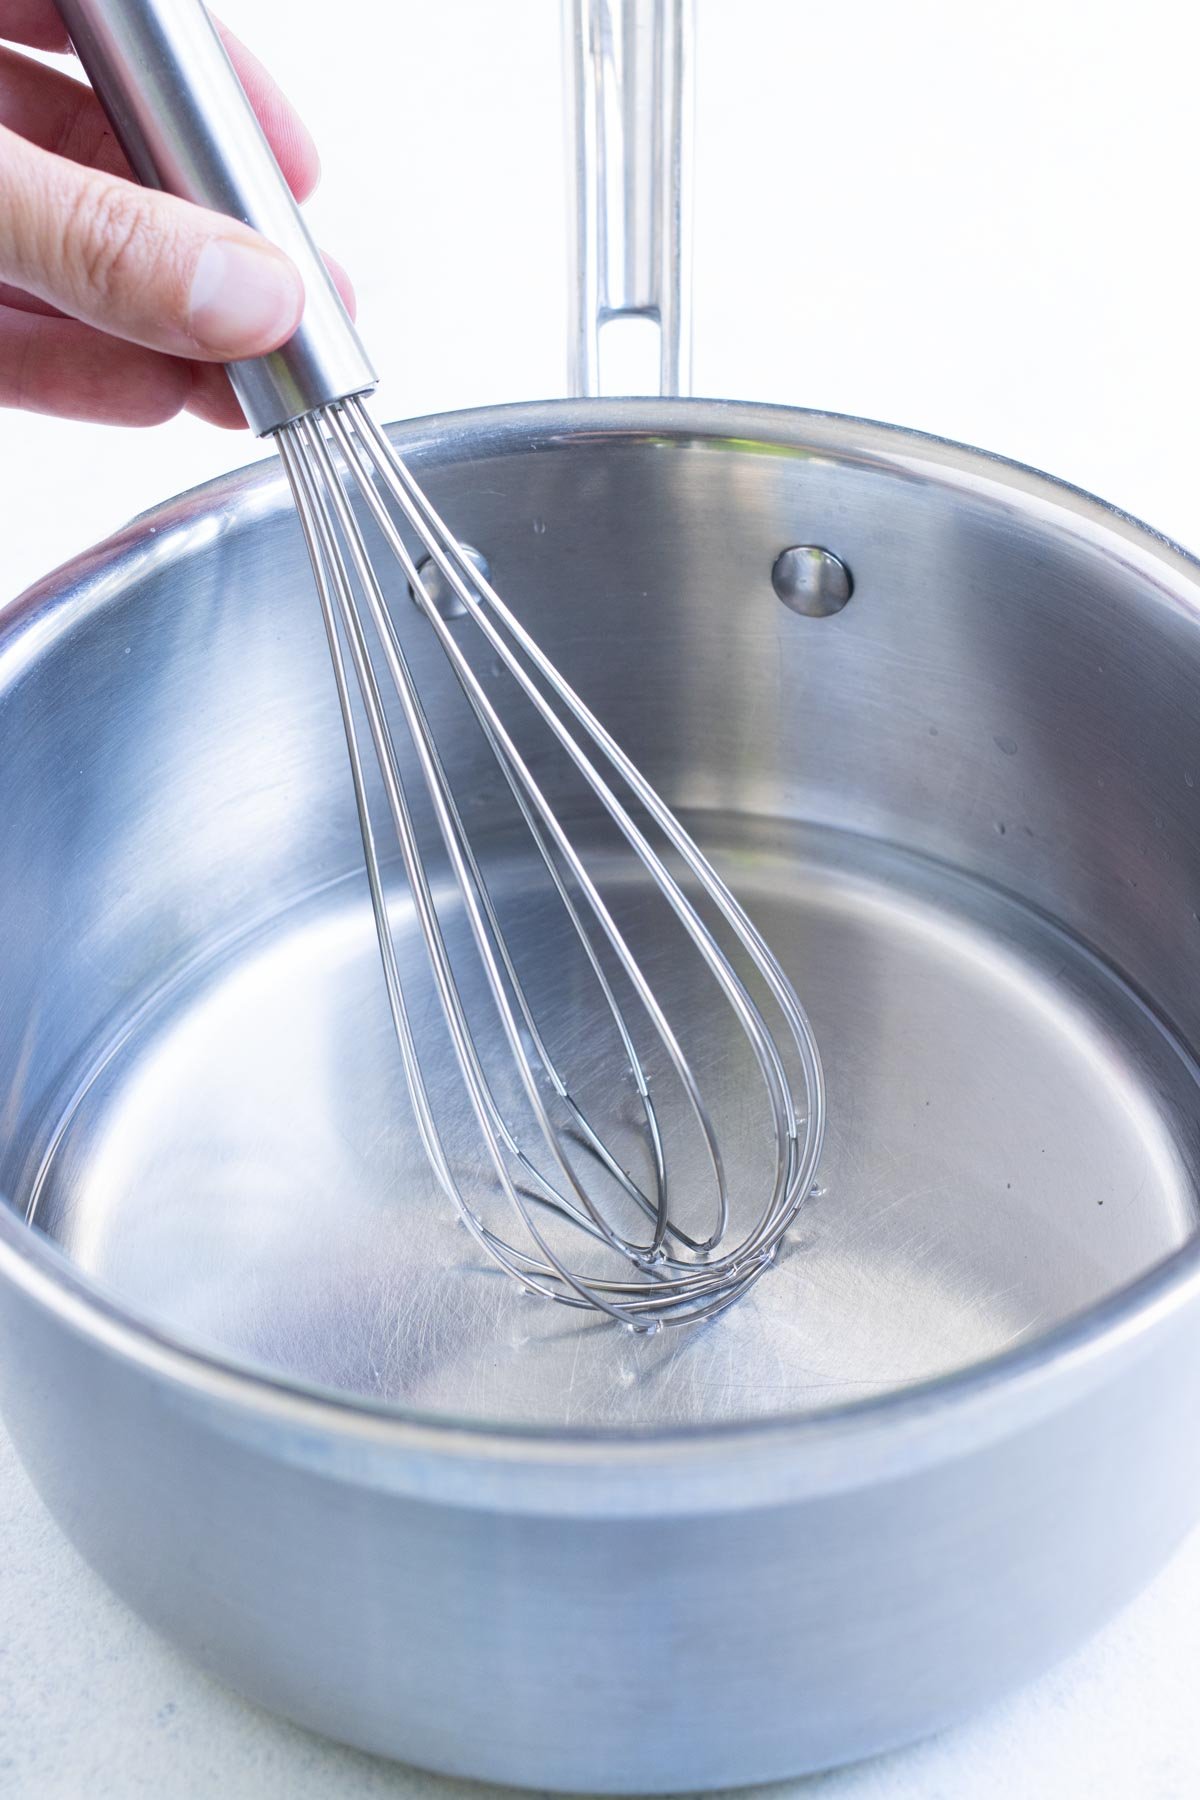 A whisk stirs the brining solution in a saucepan.